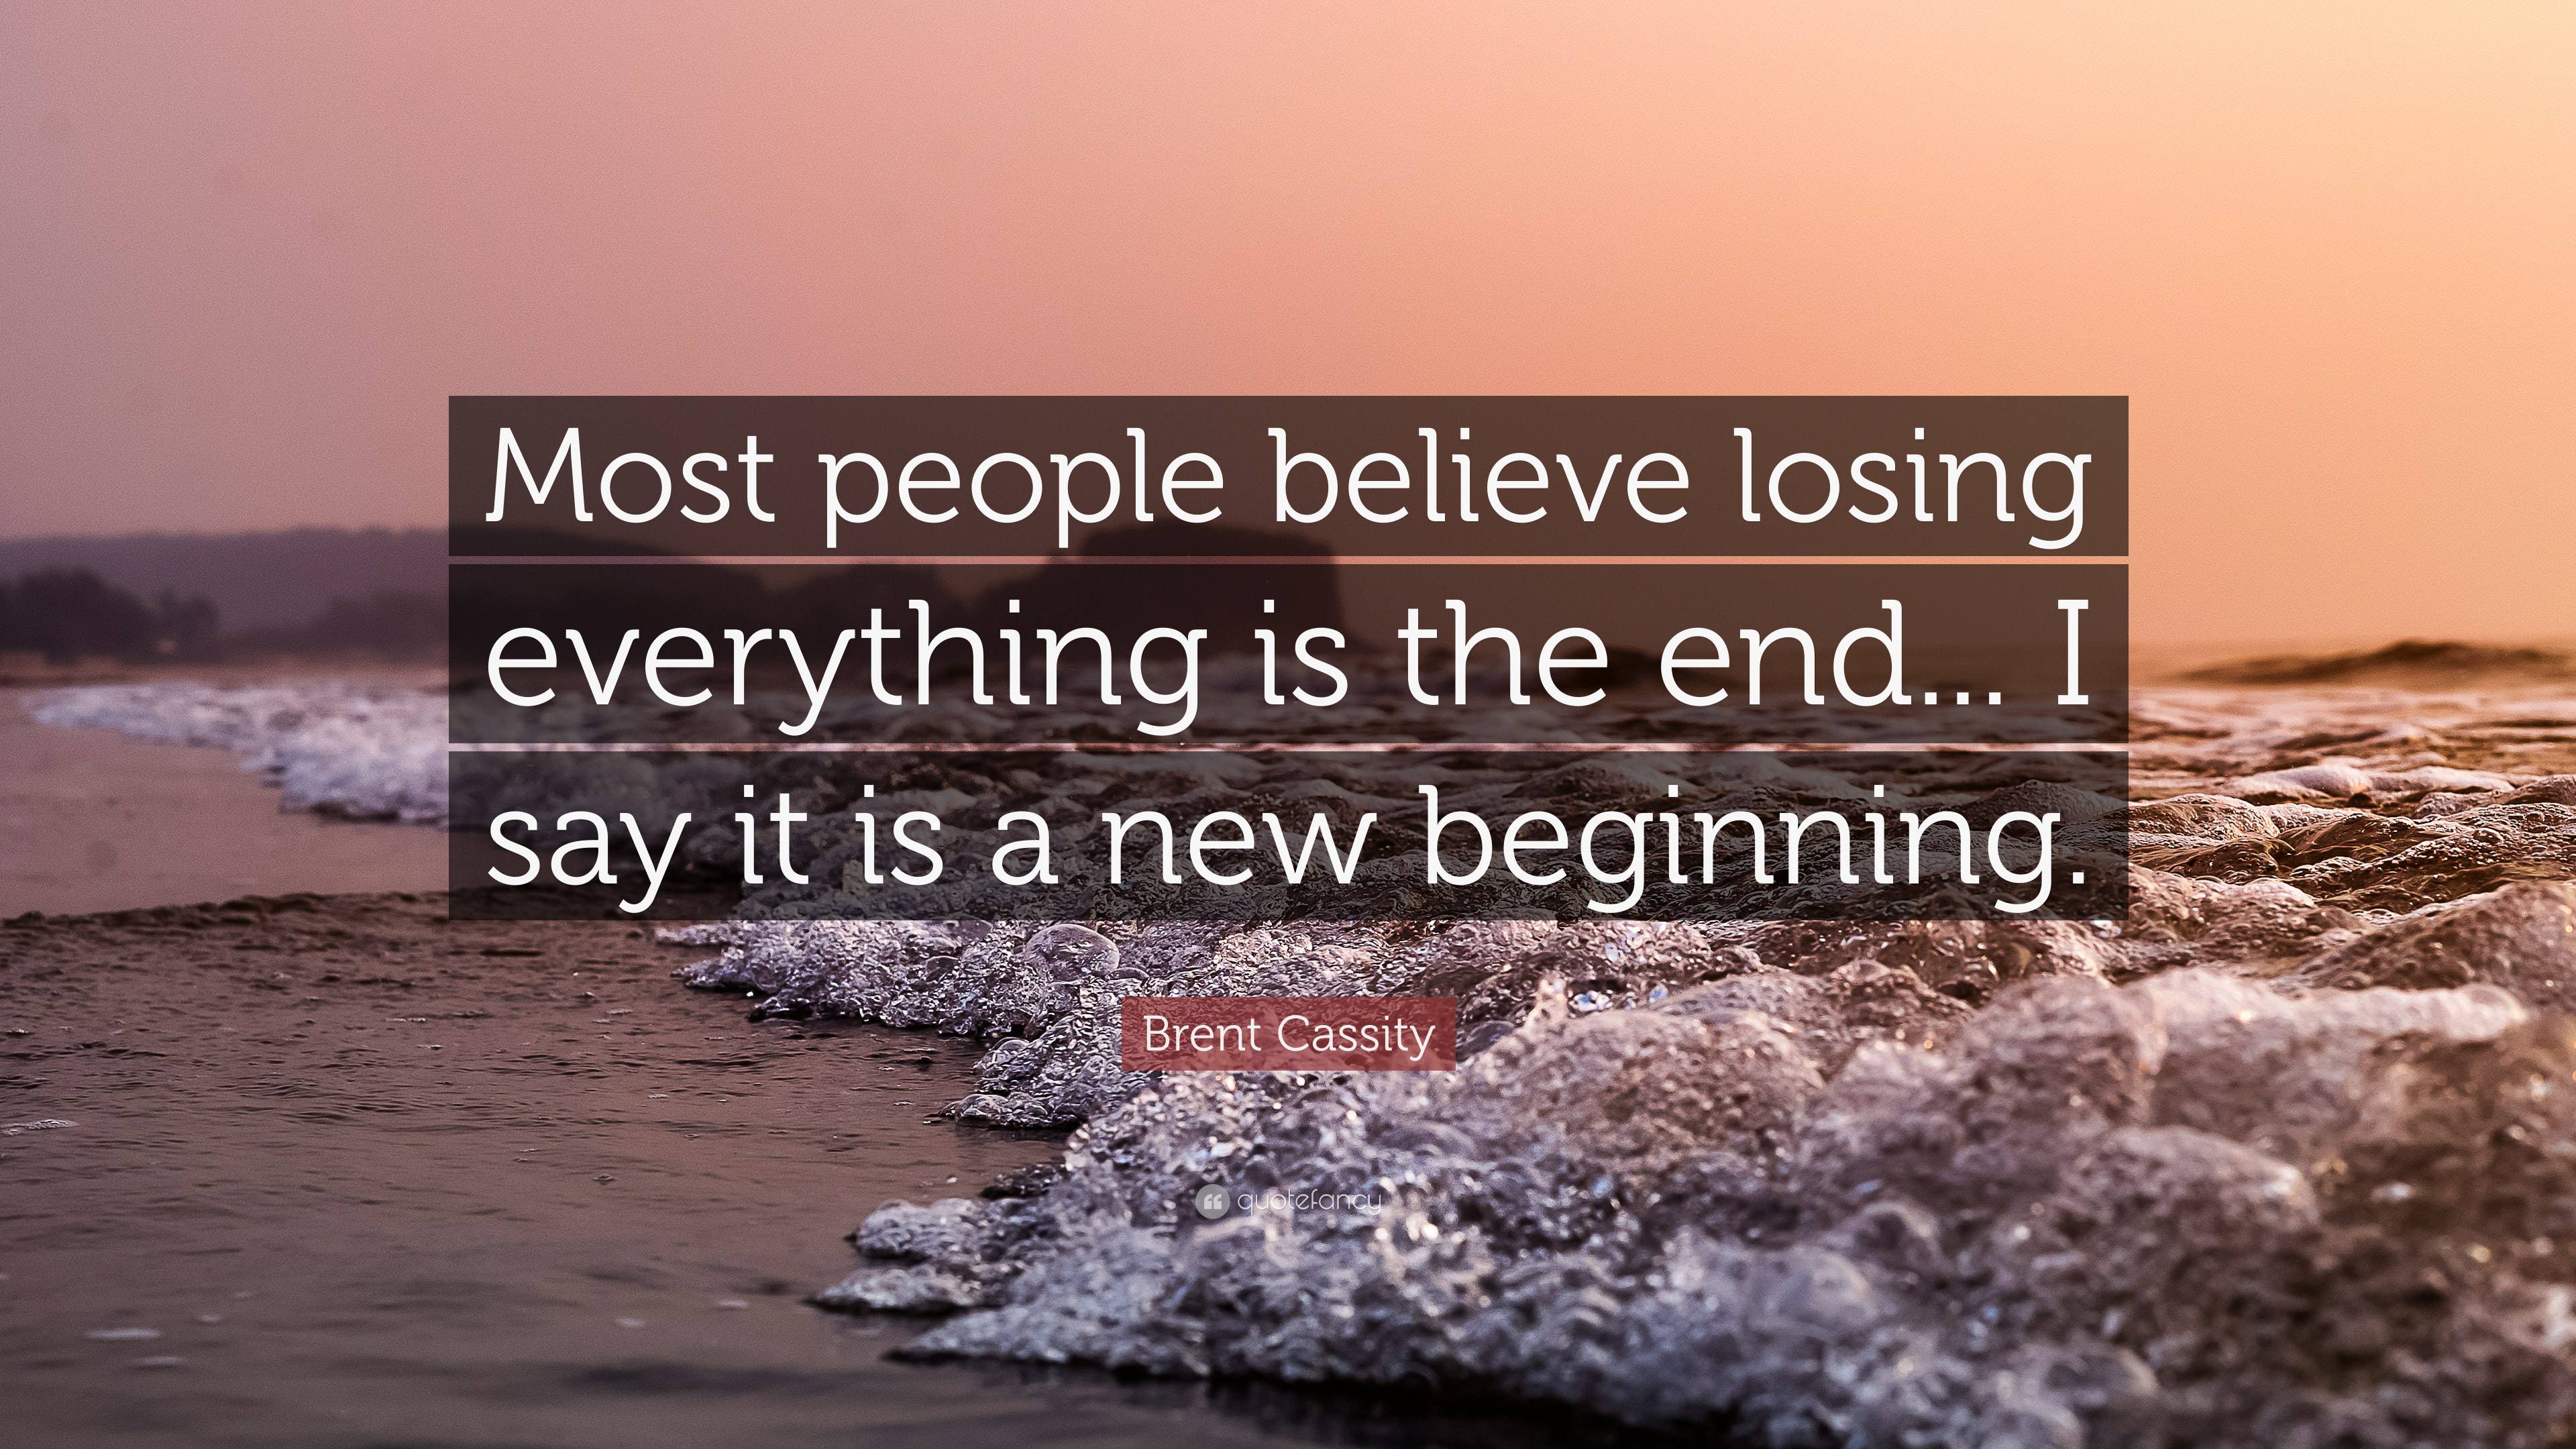 Brent Cassity Quote: “Most people believe losing everything is the end ...